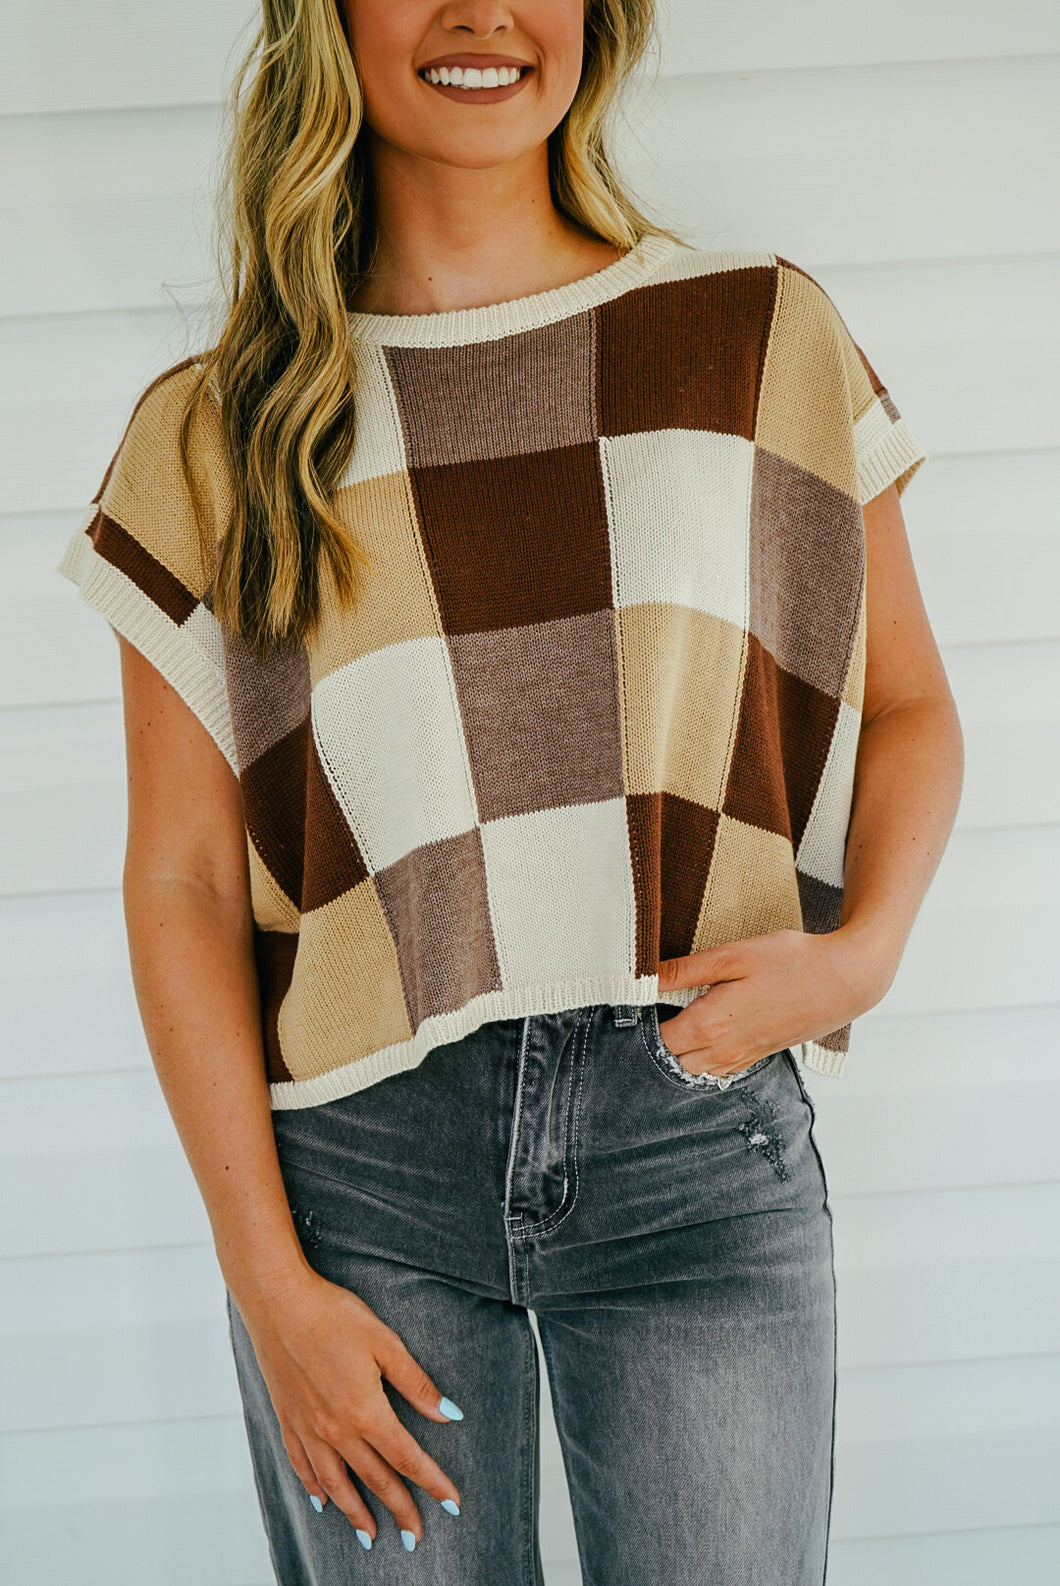 Back To School Colorblock Sweater